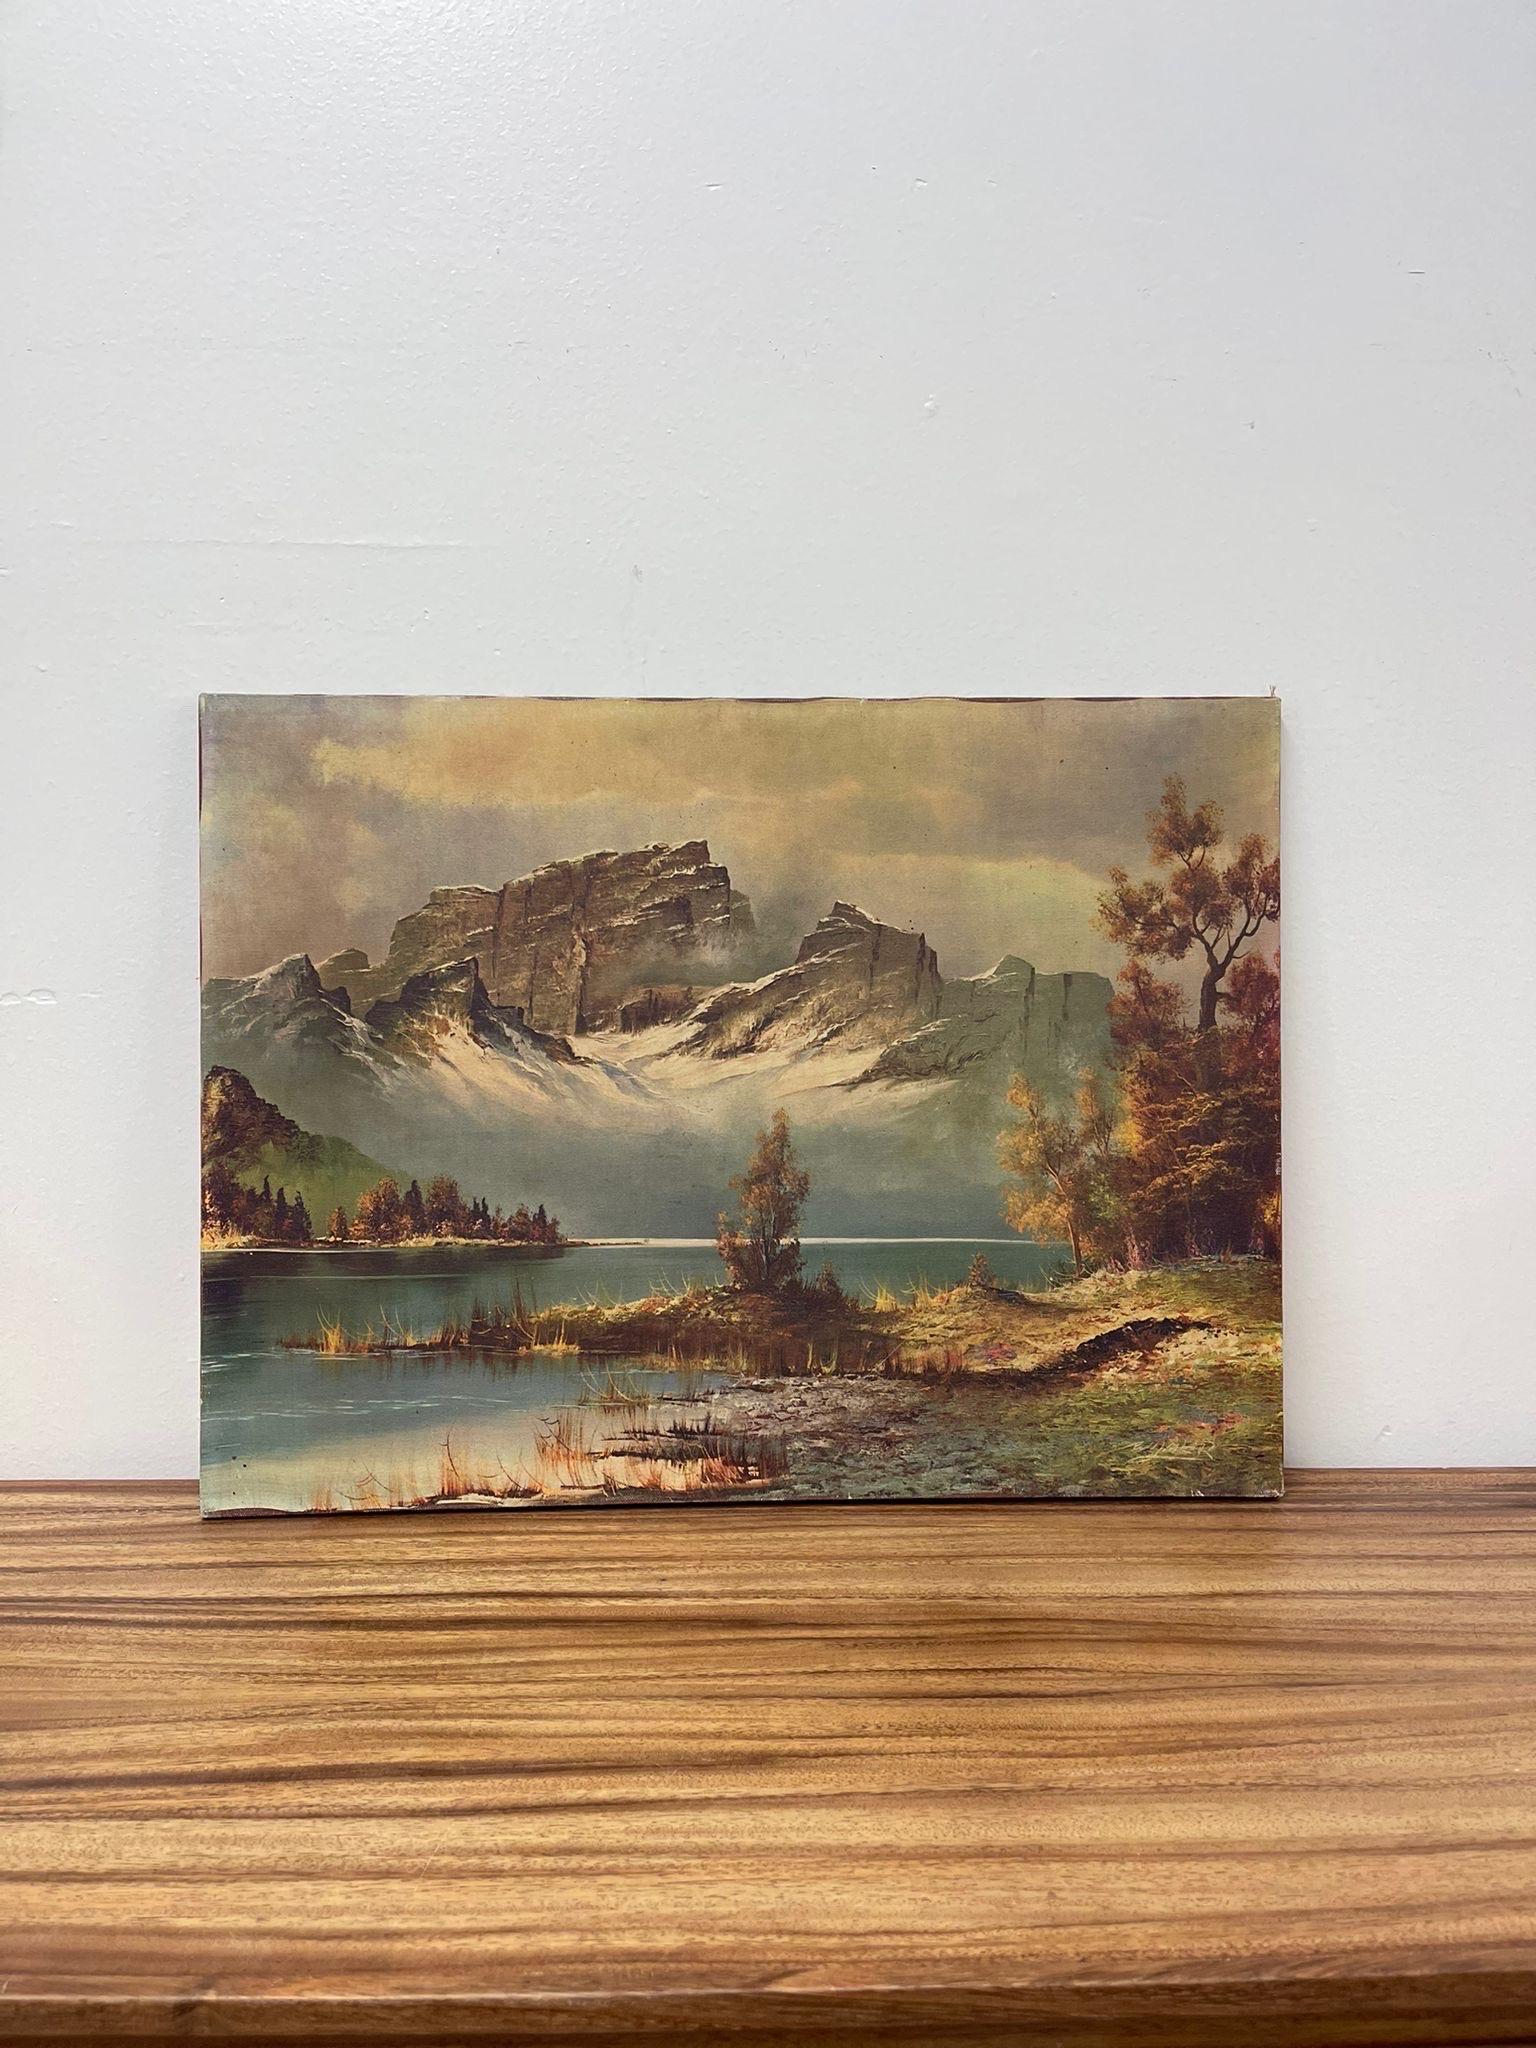 Landscape Print of Mountains over a Lake in the Forest. Beautiful Petina Consistent with Age. Signed in the Lower Corner.Painted Brown Edges to the Canvas. Vintage Condition Consistent with Age as Pictured.

Dimensions. 34 W ; 1/4 D ; 18 H